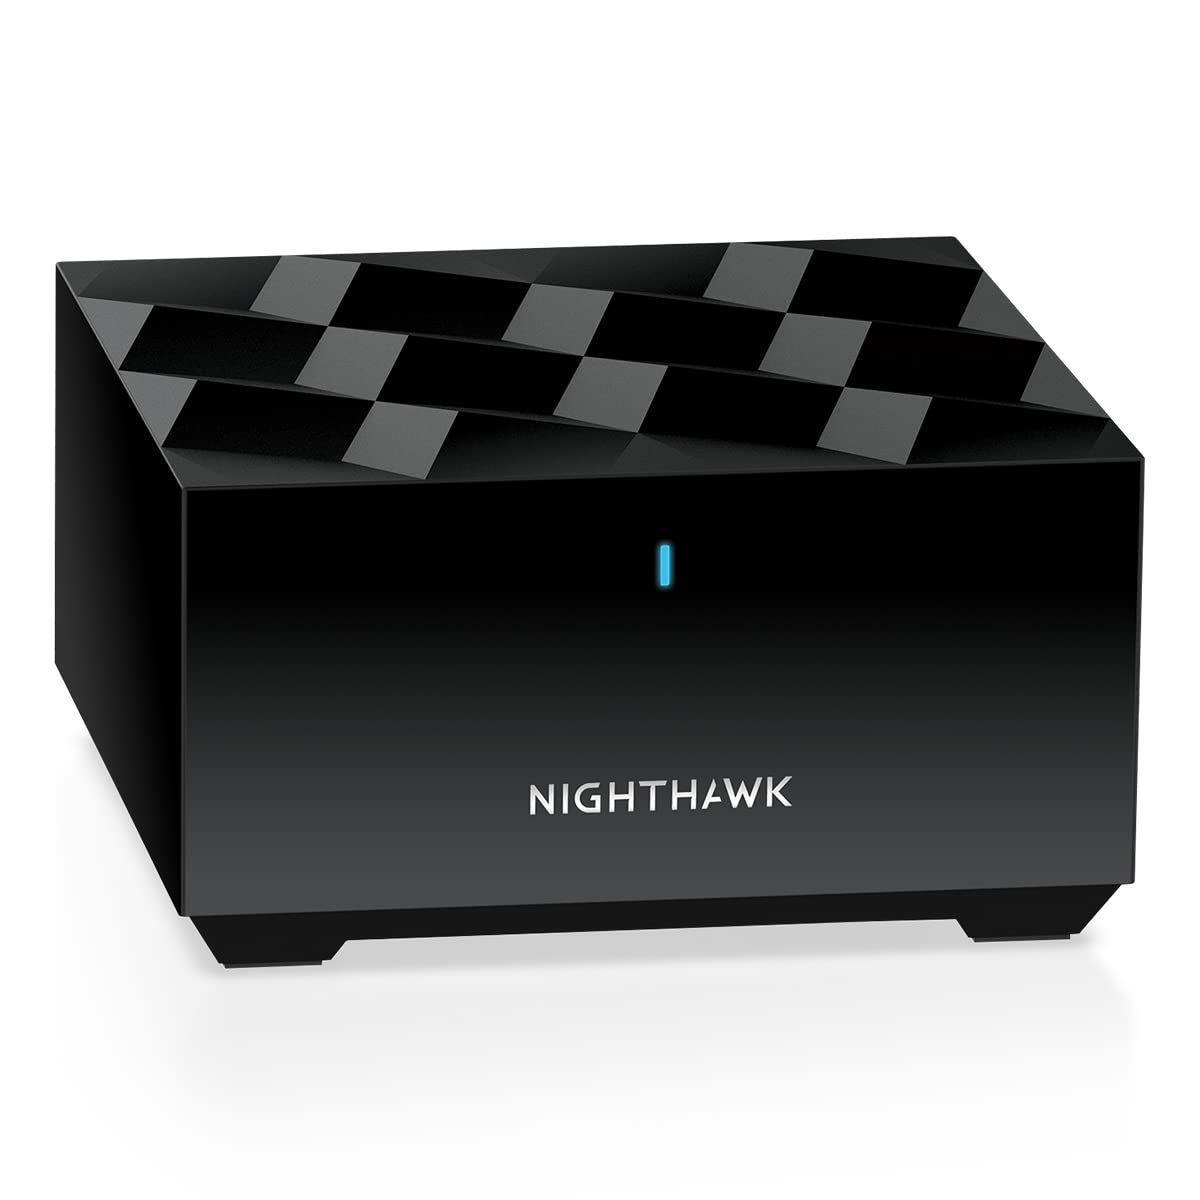 NETGEAR Nighthawk Dual-Band Whole Home Mesh WiFi 6 Add-on Satellite (MS70) – Works with Your Nighthawk MK72 Or MK73 System, Adds up to 1,500 sq. ft. Coverage, AX3000 (Up to 3Gbps)